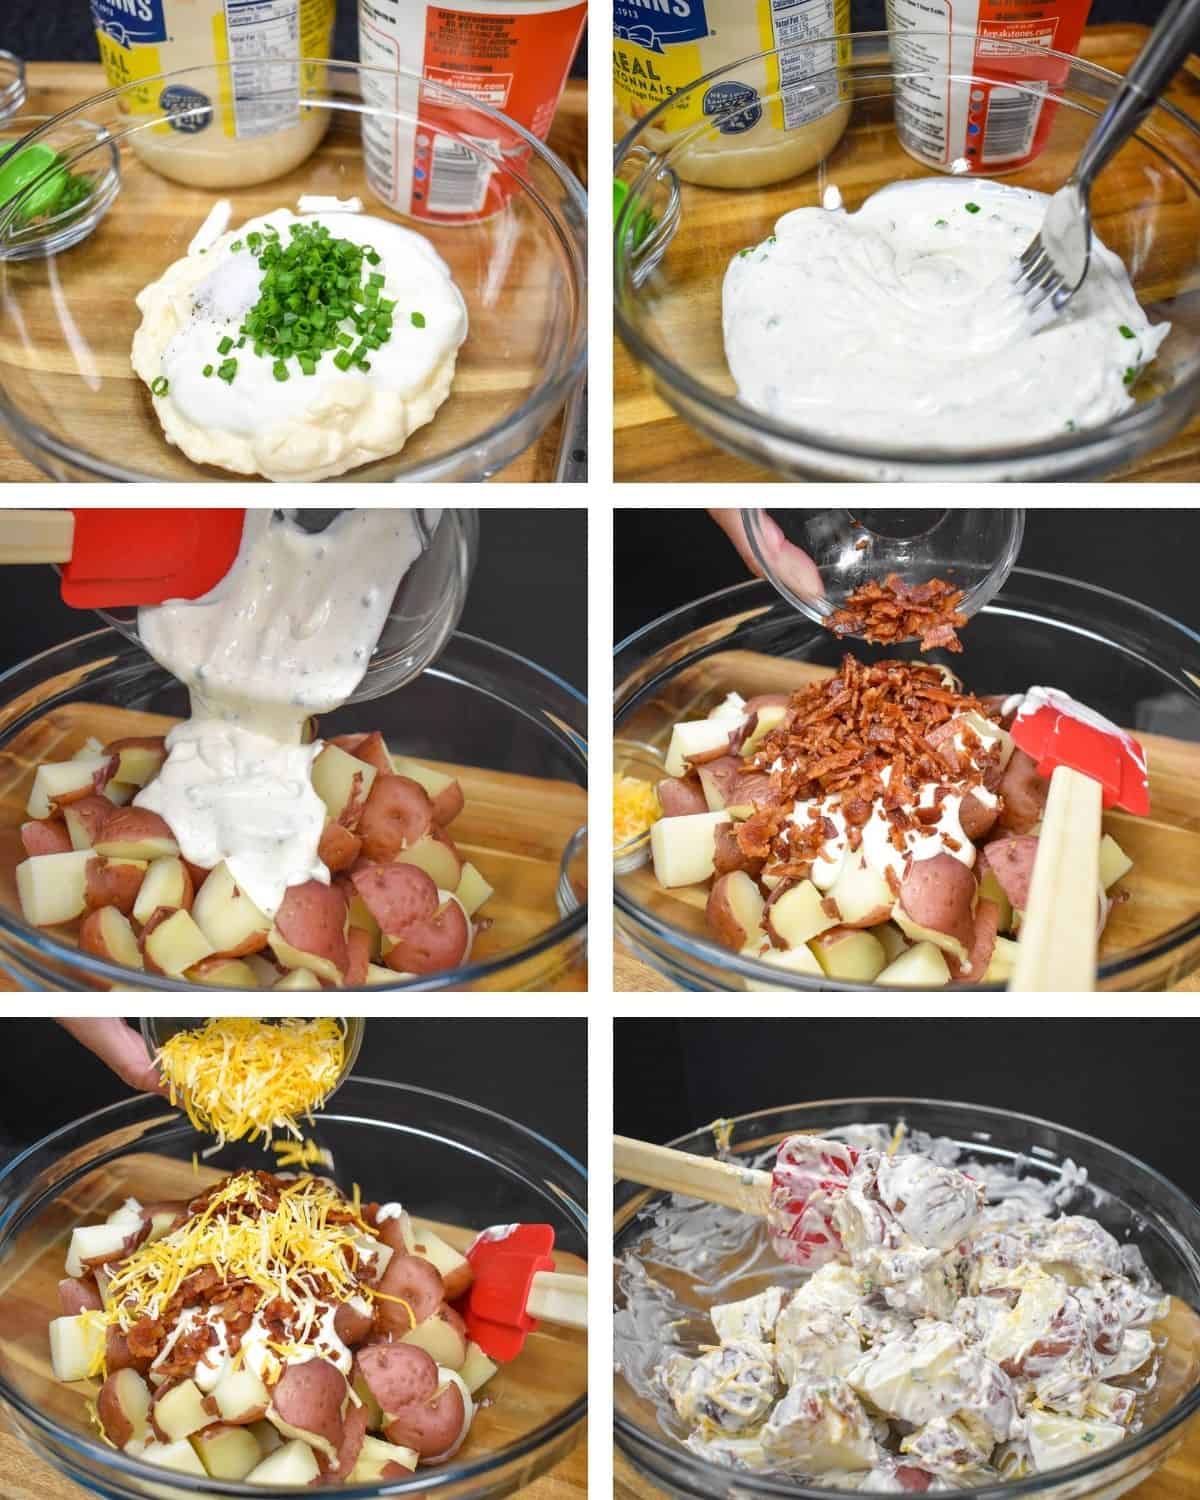 A collage of six images showing how to put together the loaded potato salad.